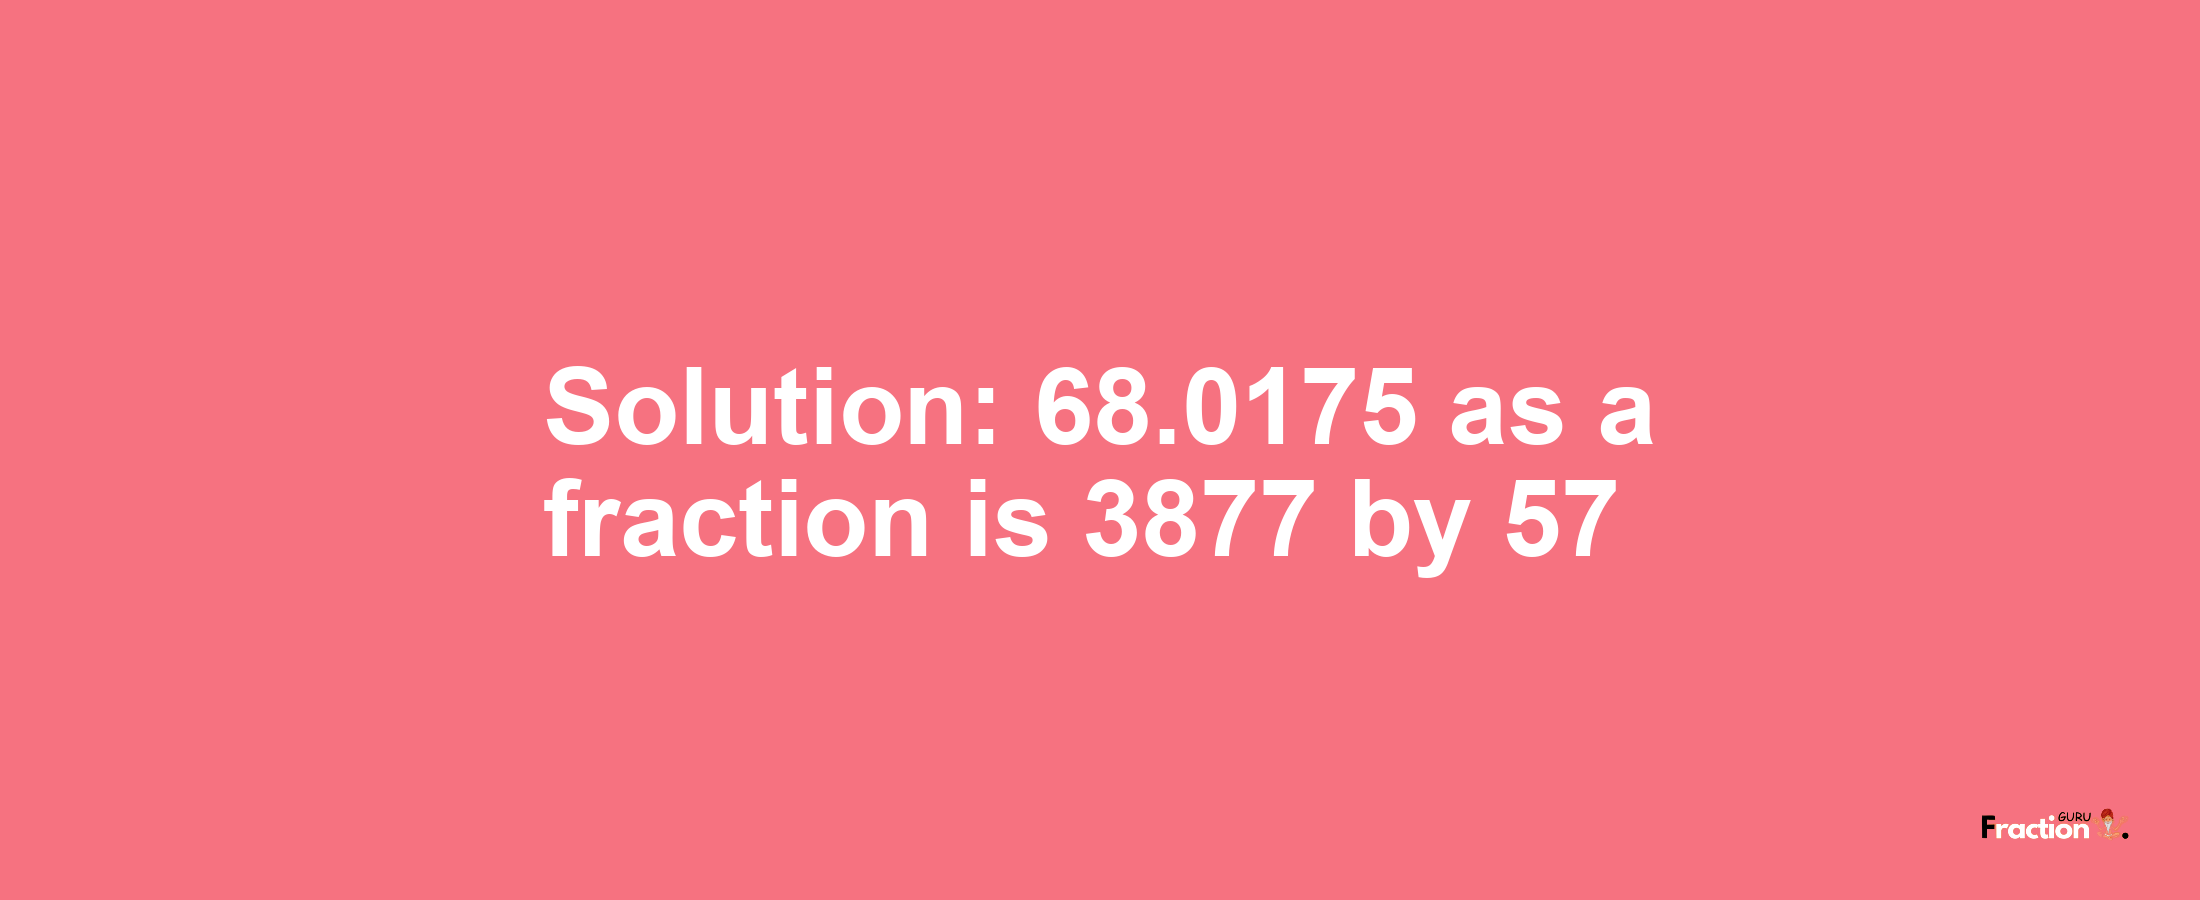 Solution:68.0175 as a fraction is 3877/57